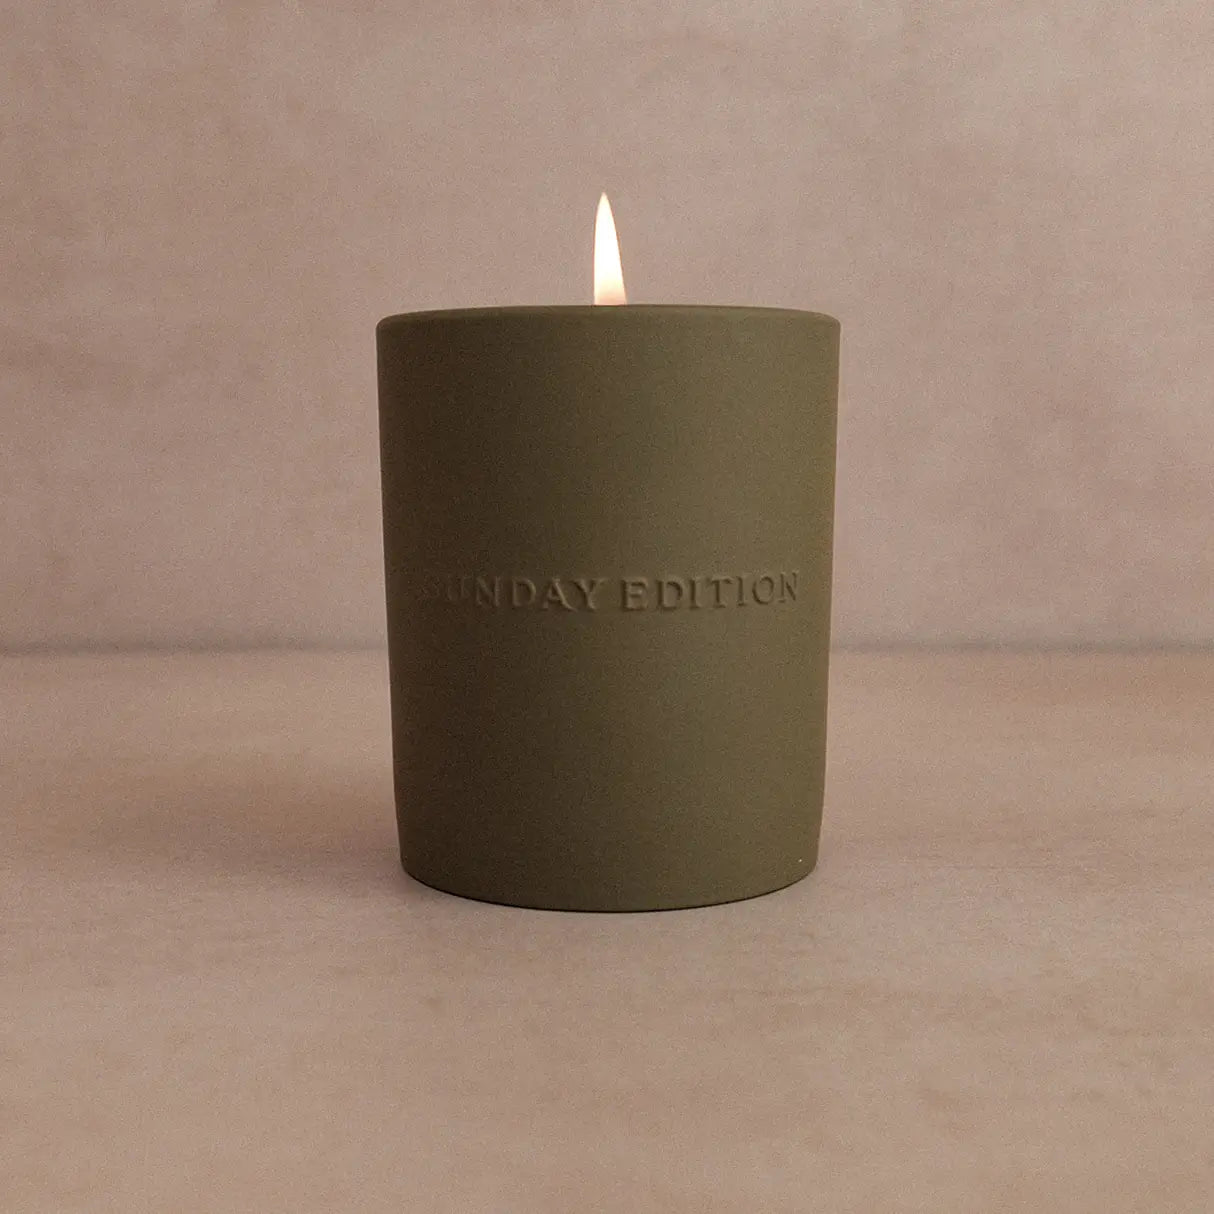 The Root Candle By Sunday Edition